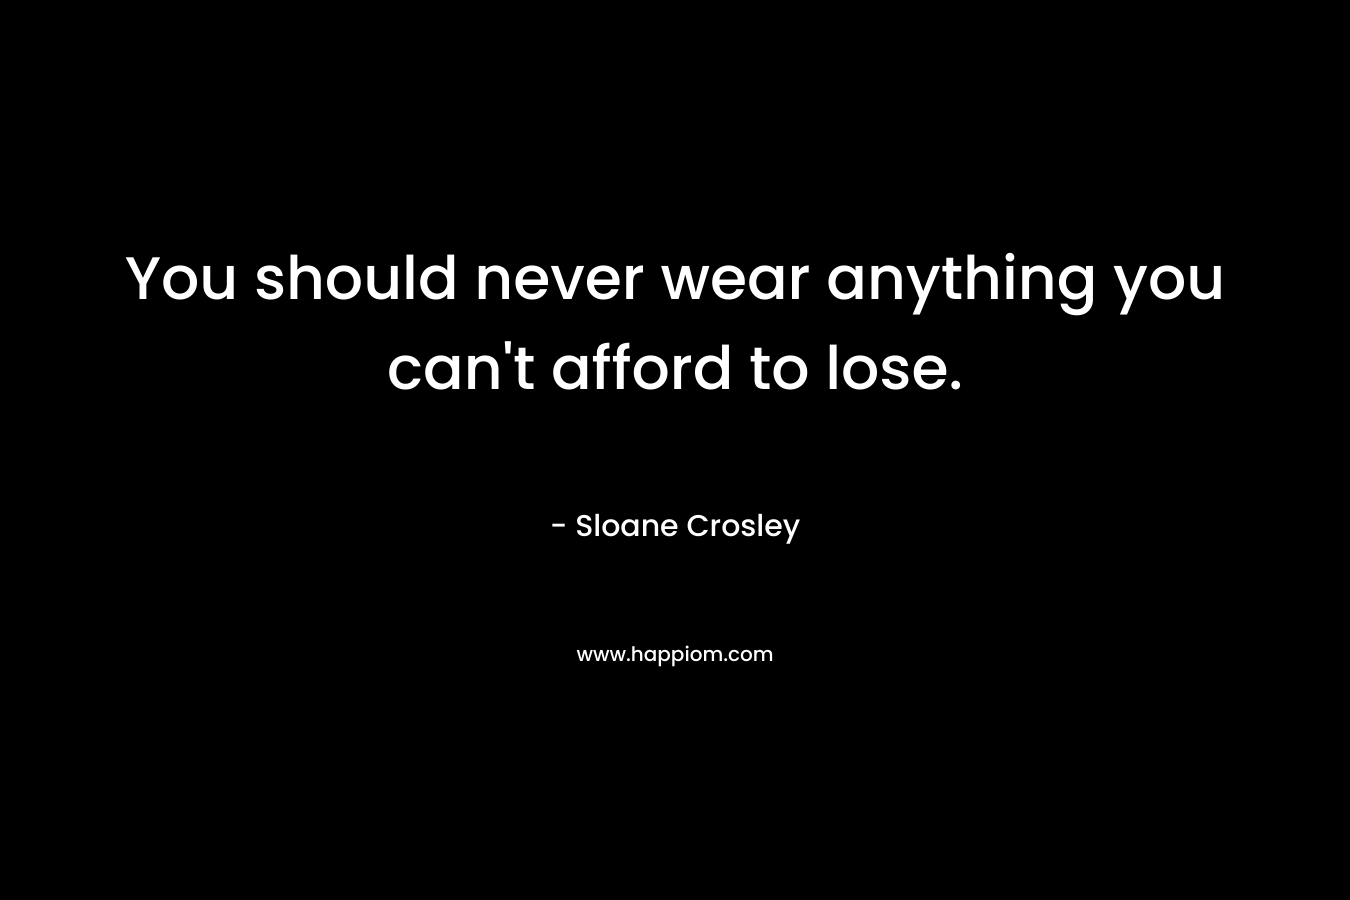 You should never wear anything you can't afford to lose.